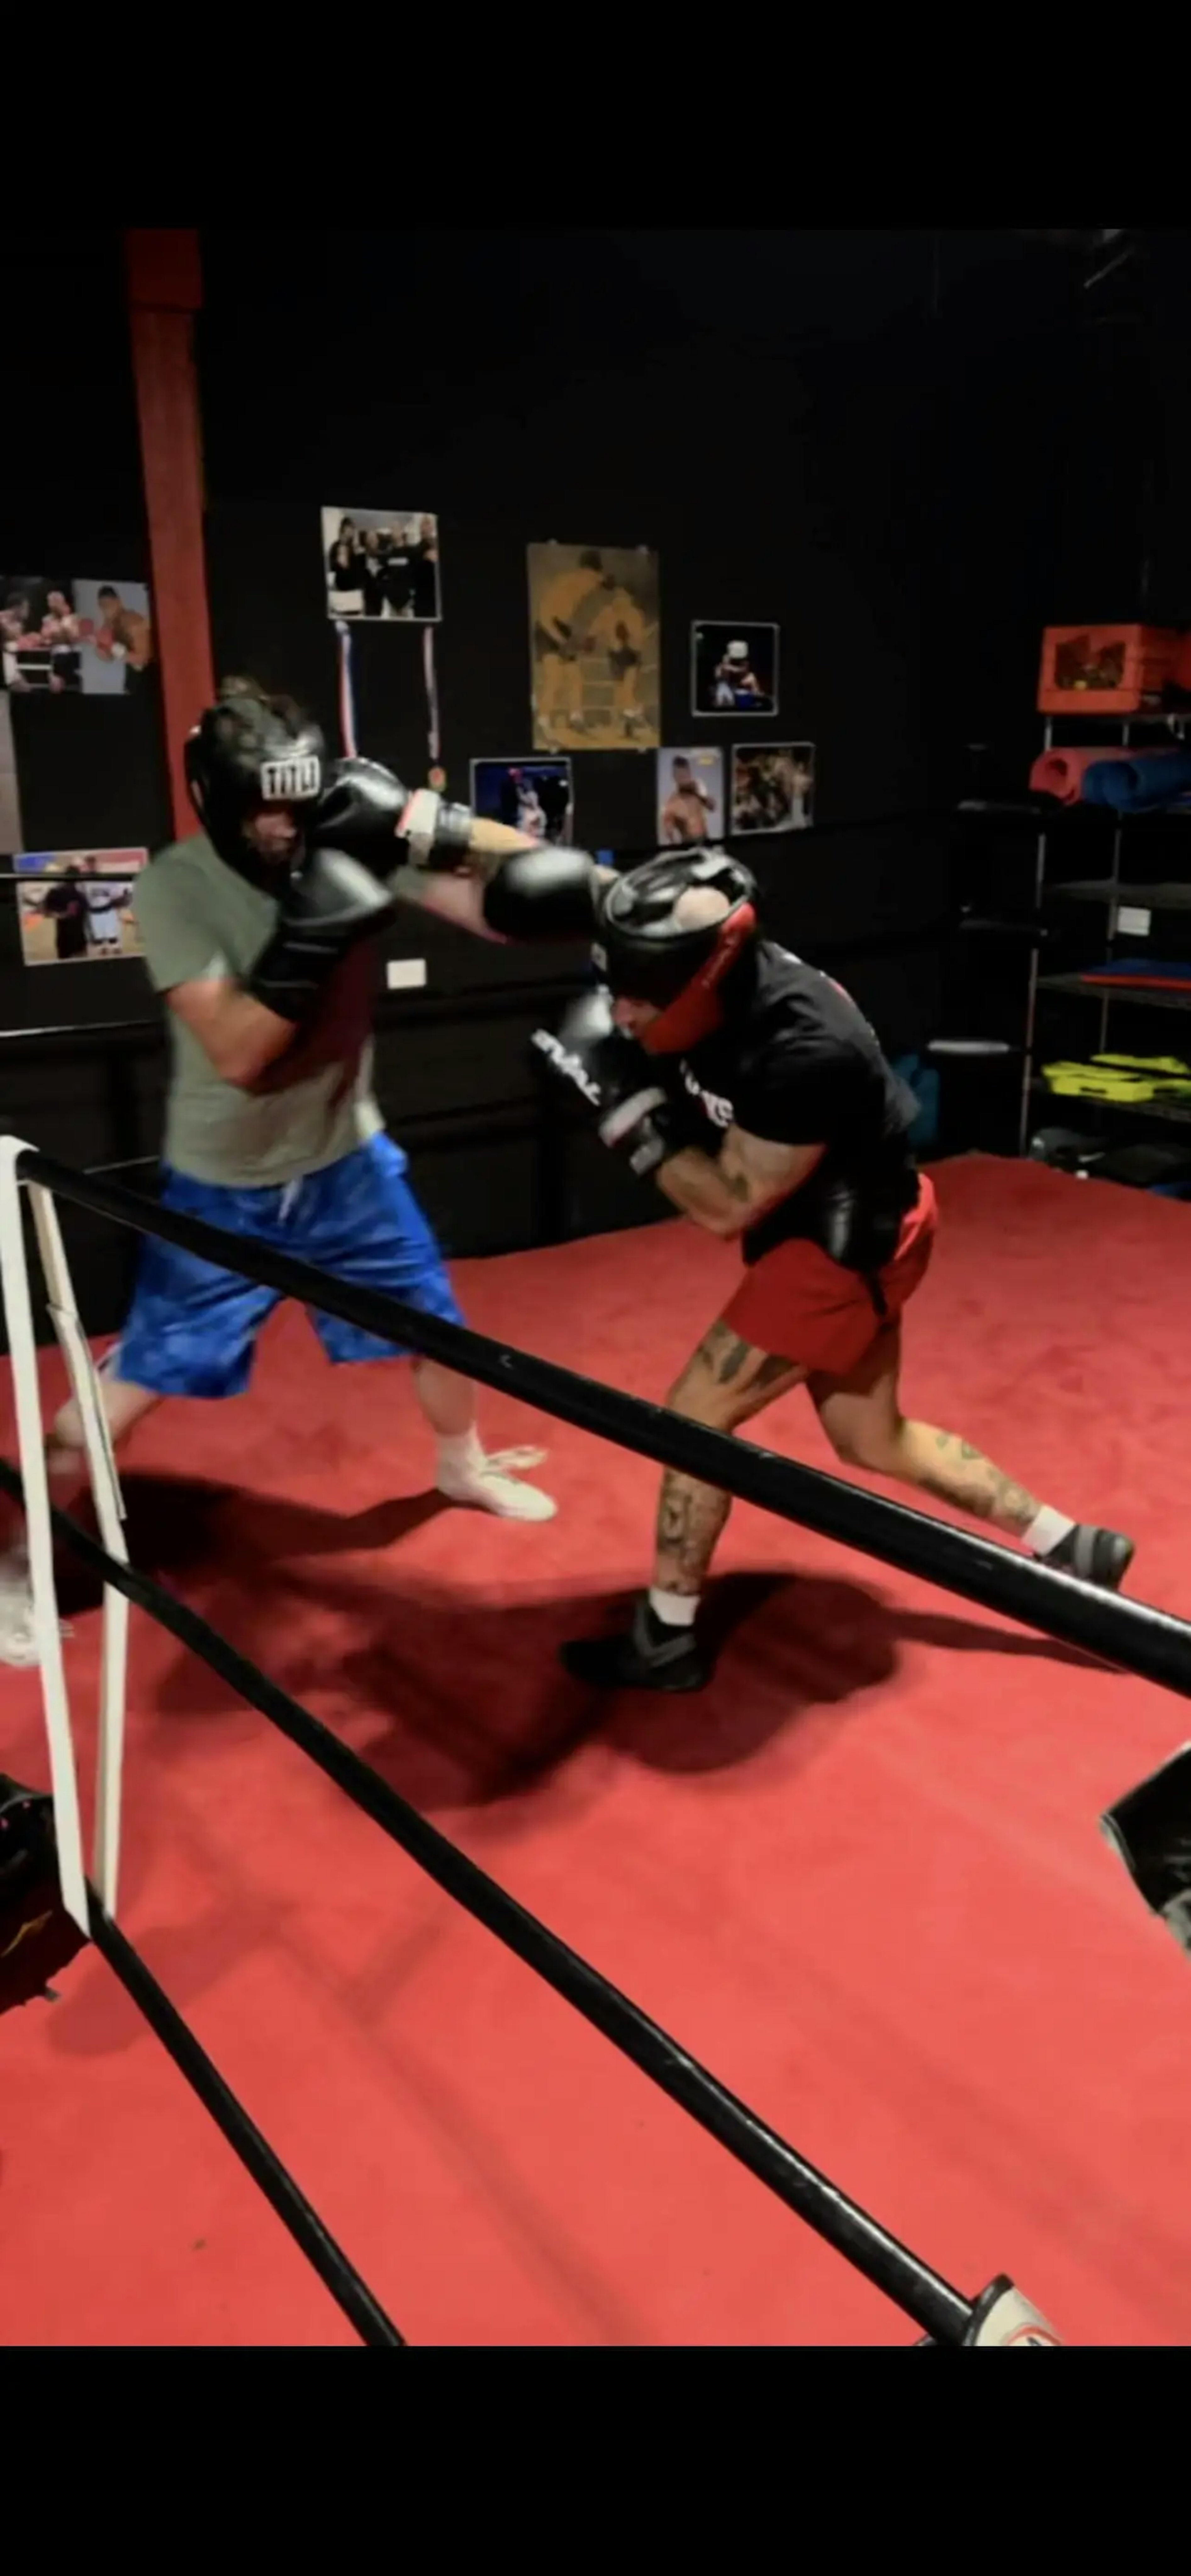 Two members sparring close up.